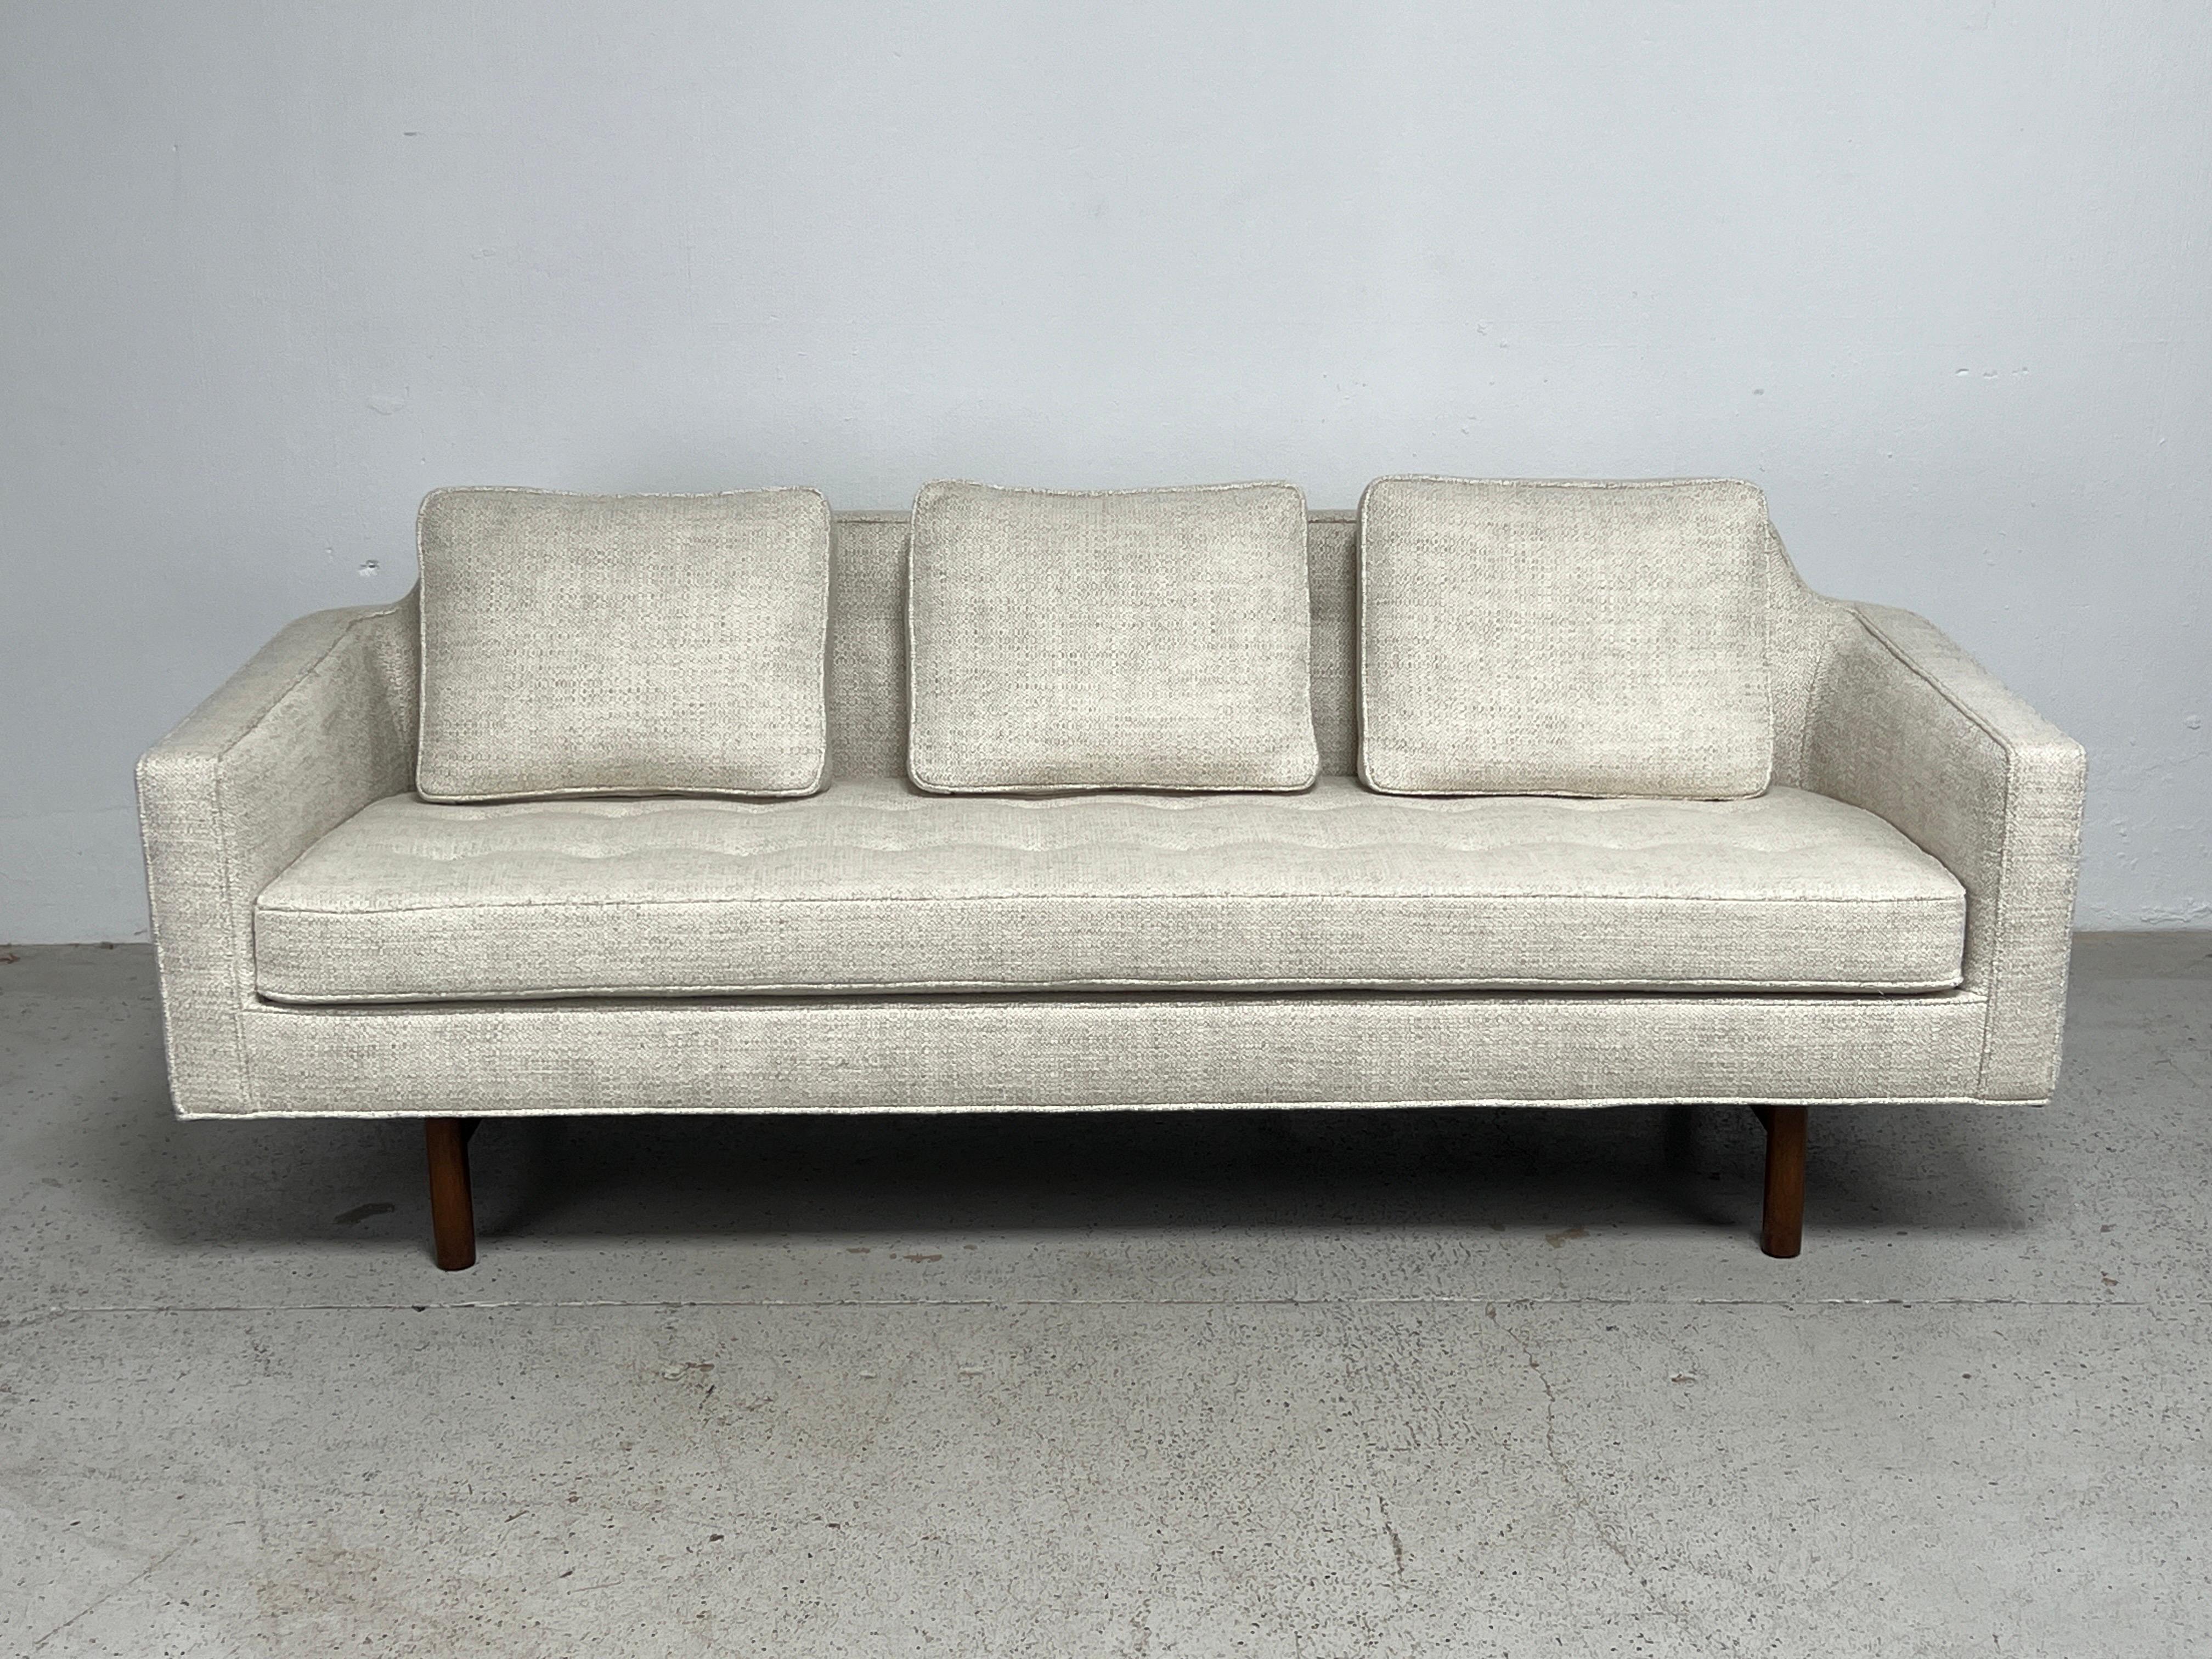 A beautifully restored Dunbar sofa designed by Edward Wormley. Recovered in Holly Hunt / Esposito / Greige. 